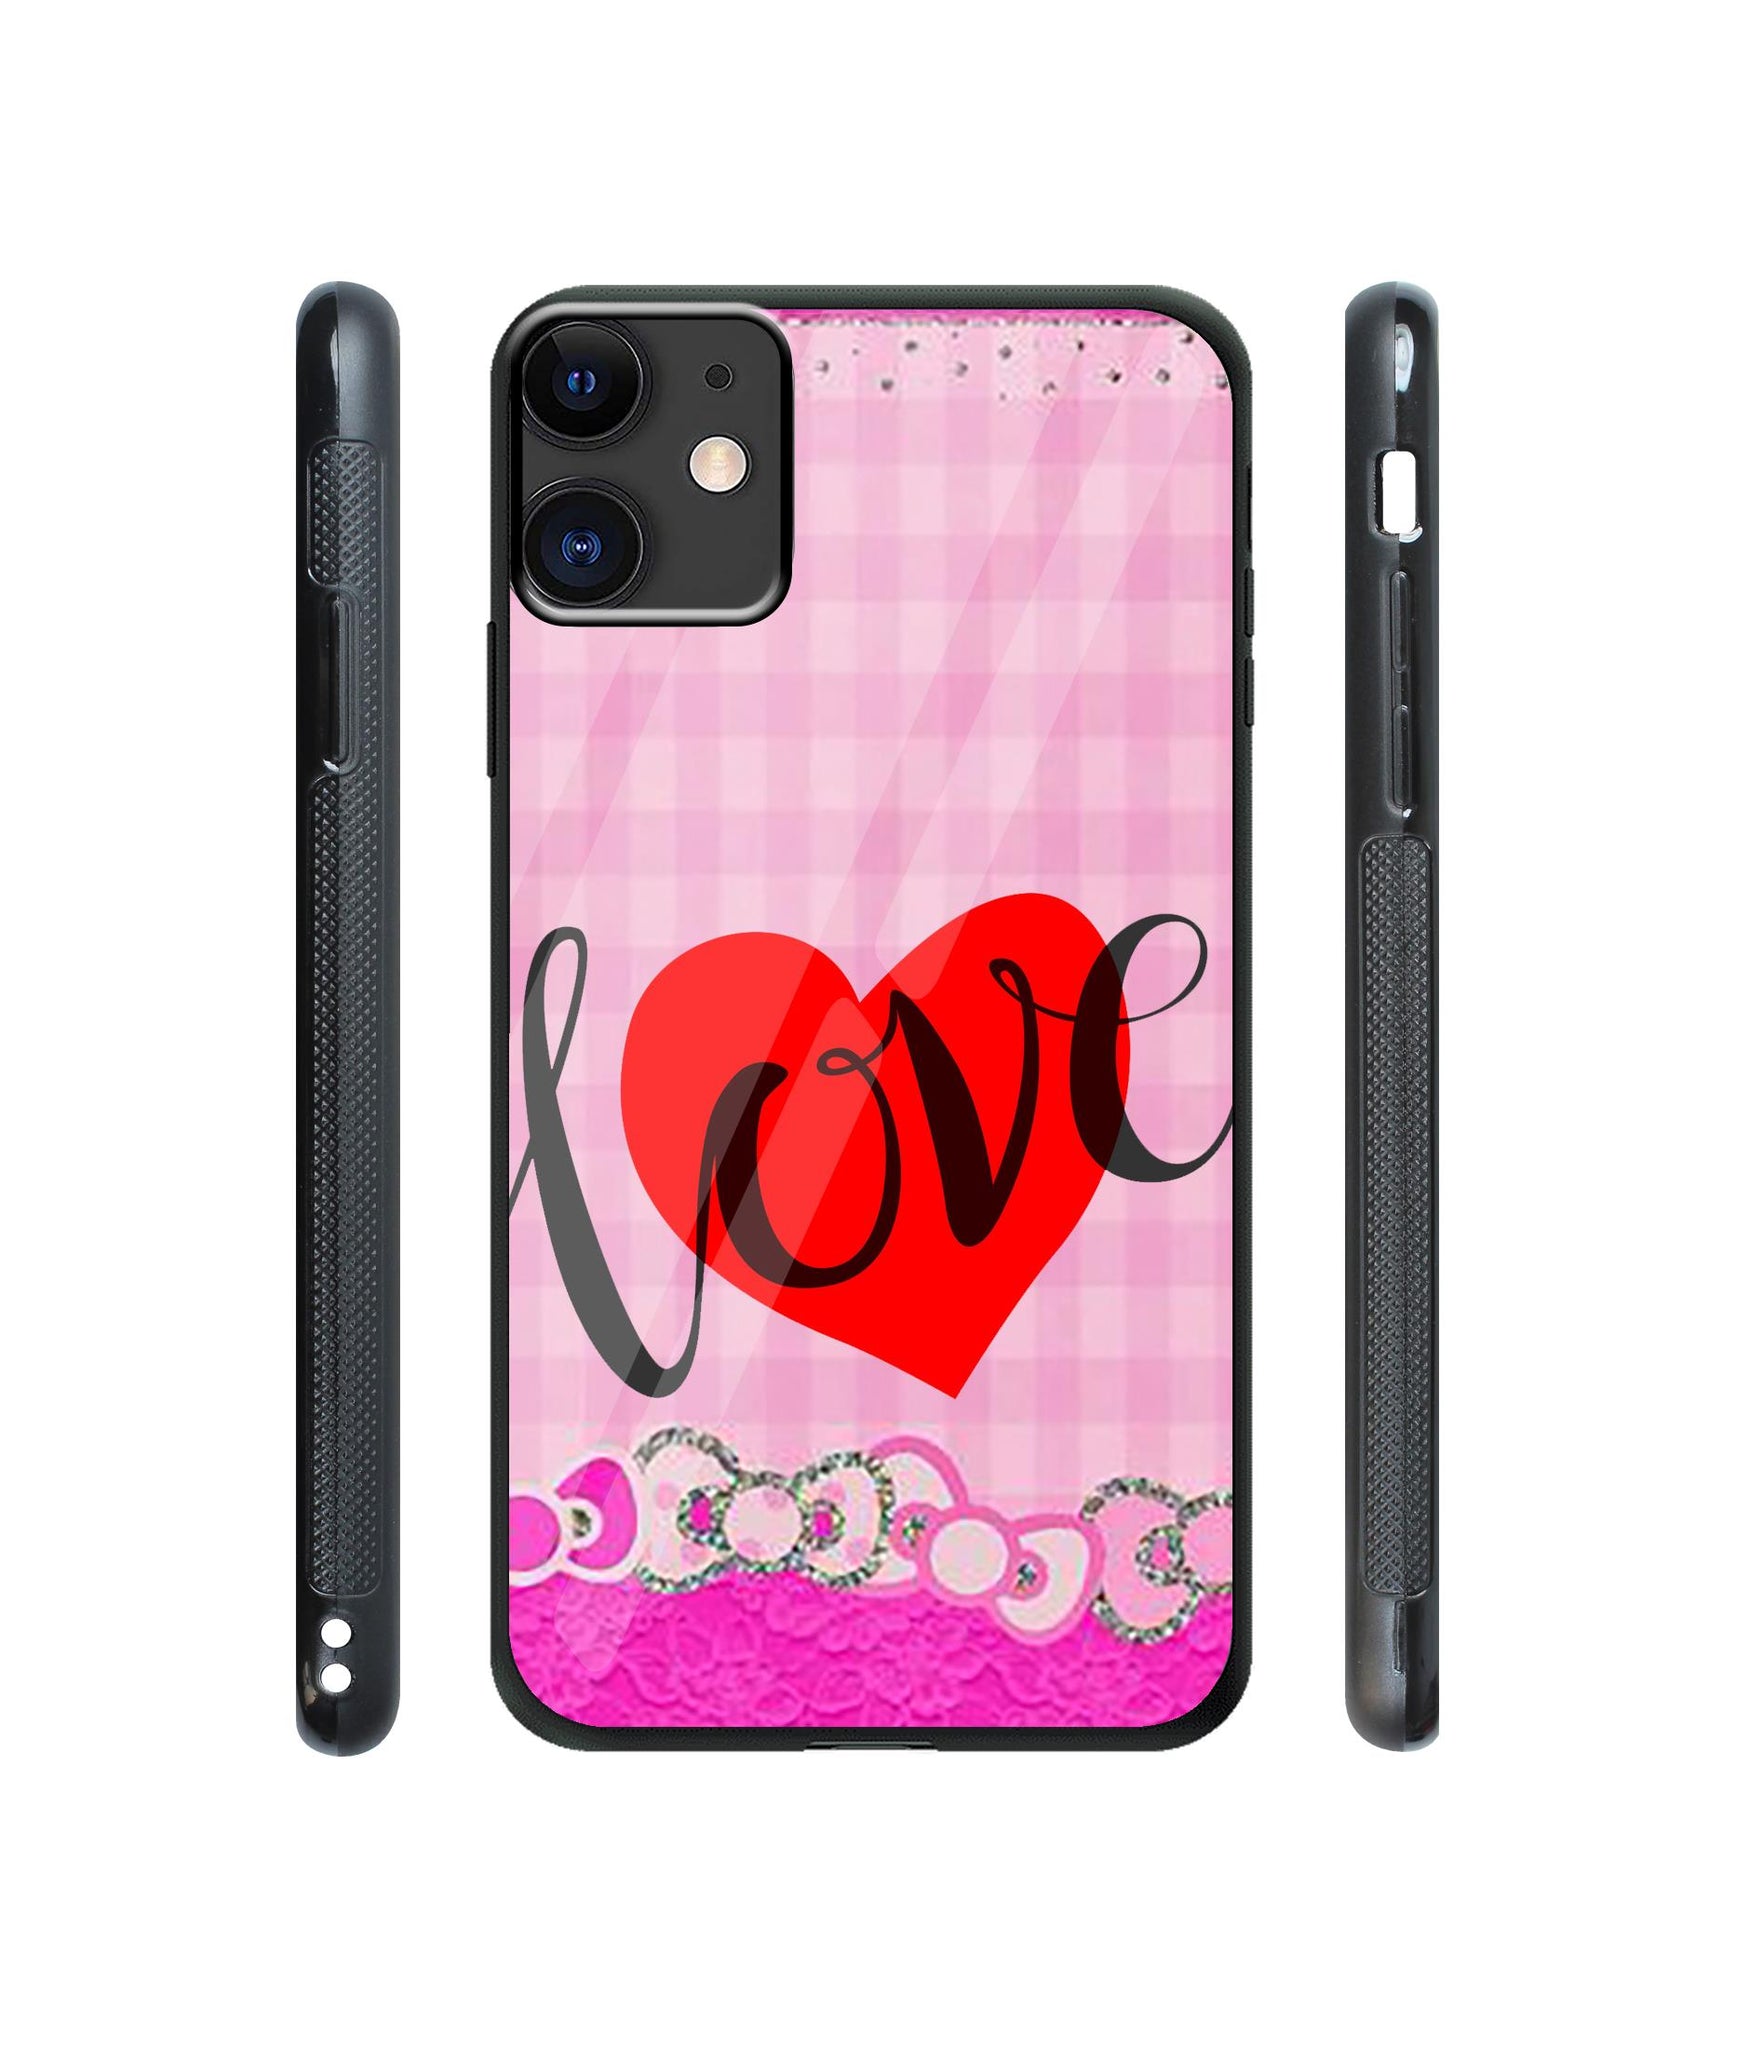 Love Print On Cloth Designer Printed Glass Cover for Apple iPhone 11